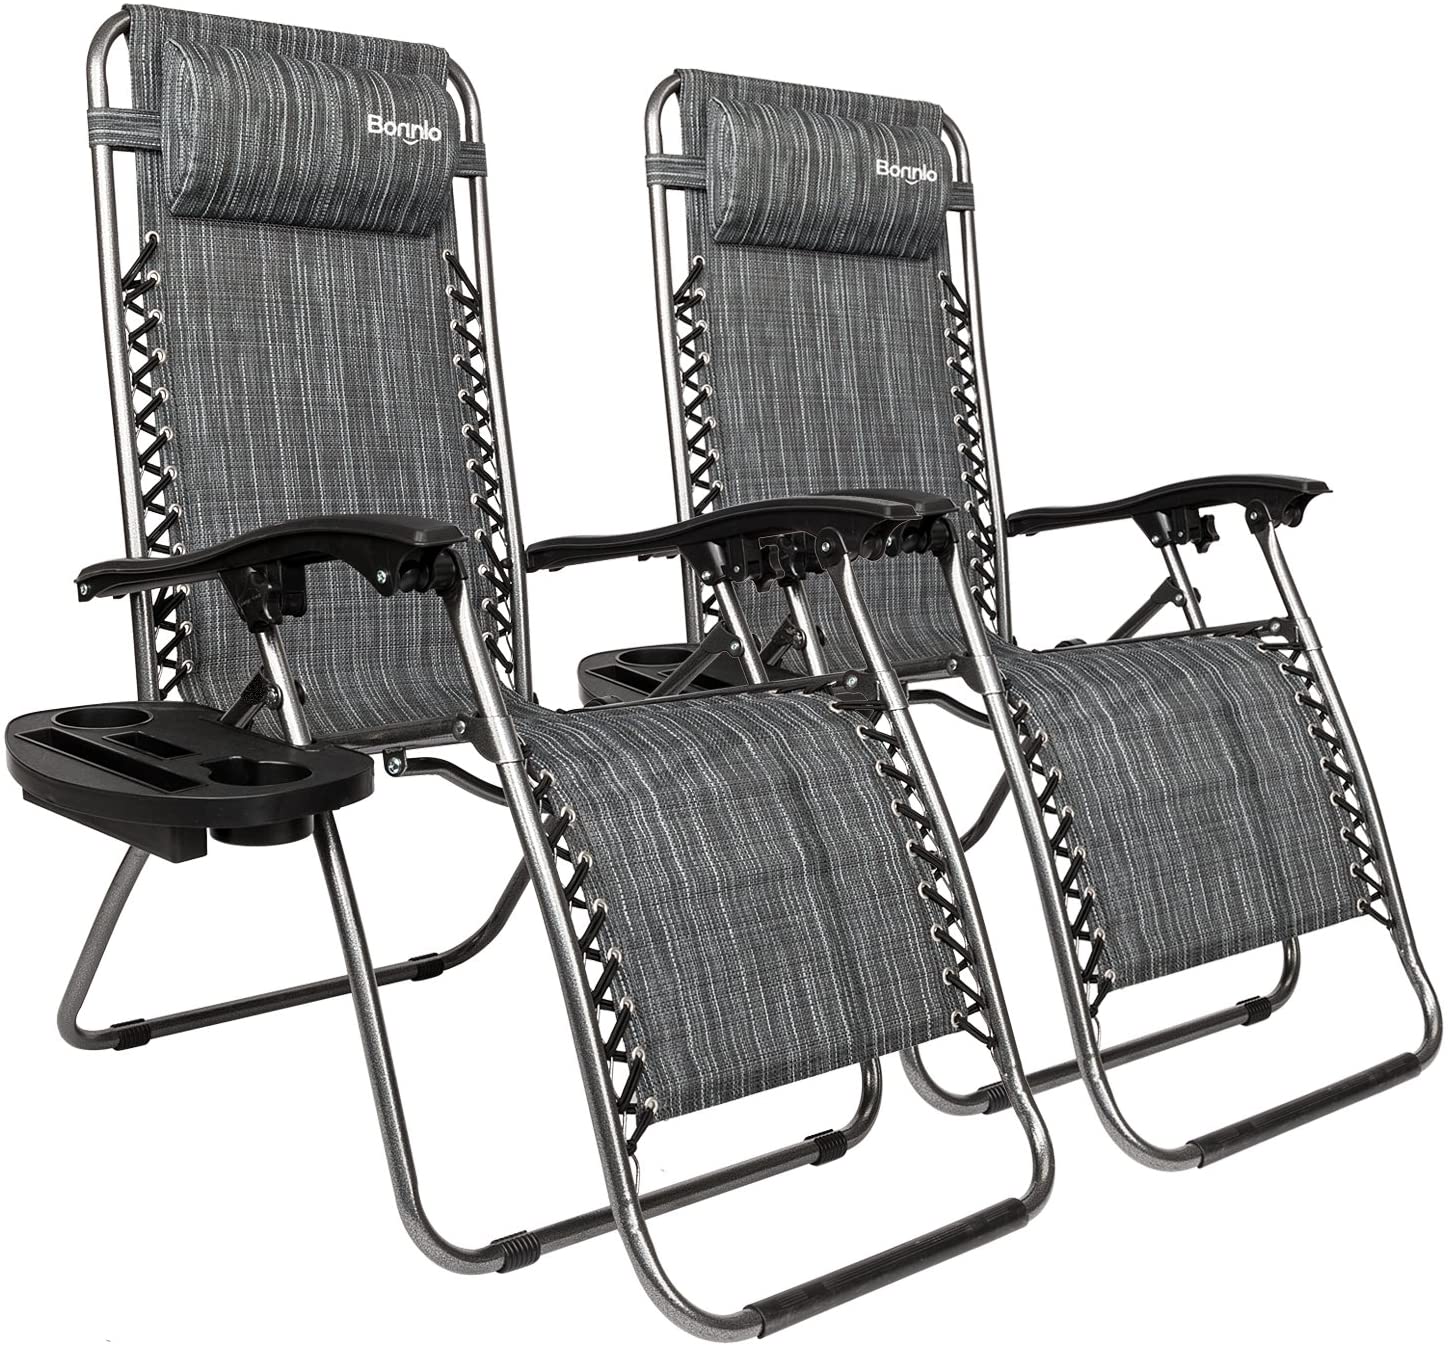 Bonnlo Infinity Zero Gravity Chair Pack 2, Outdoor Lounge Patio Chairs